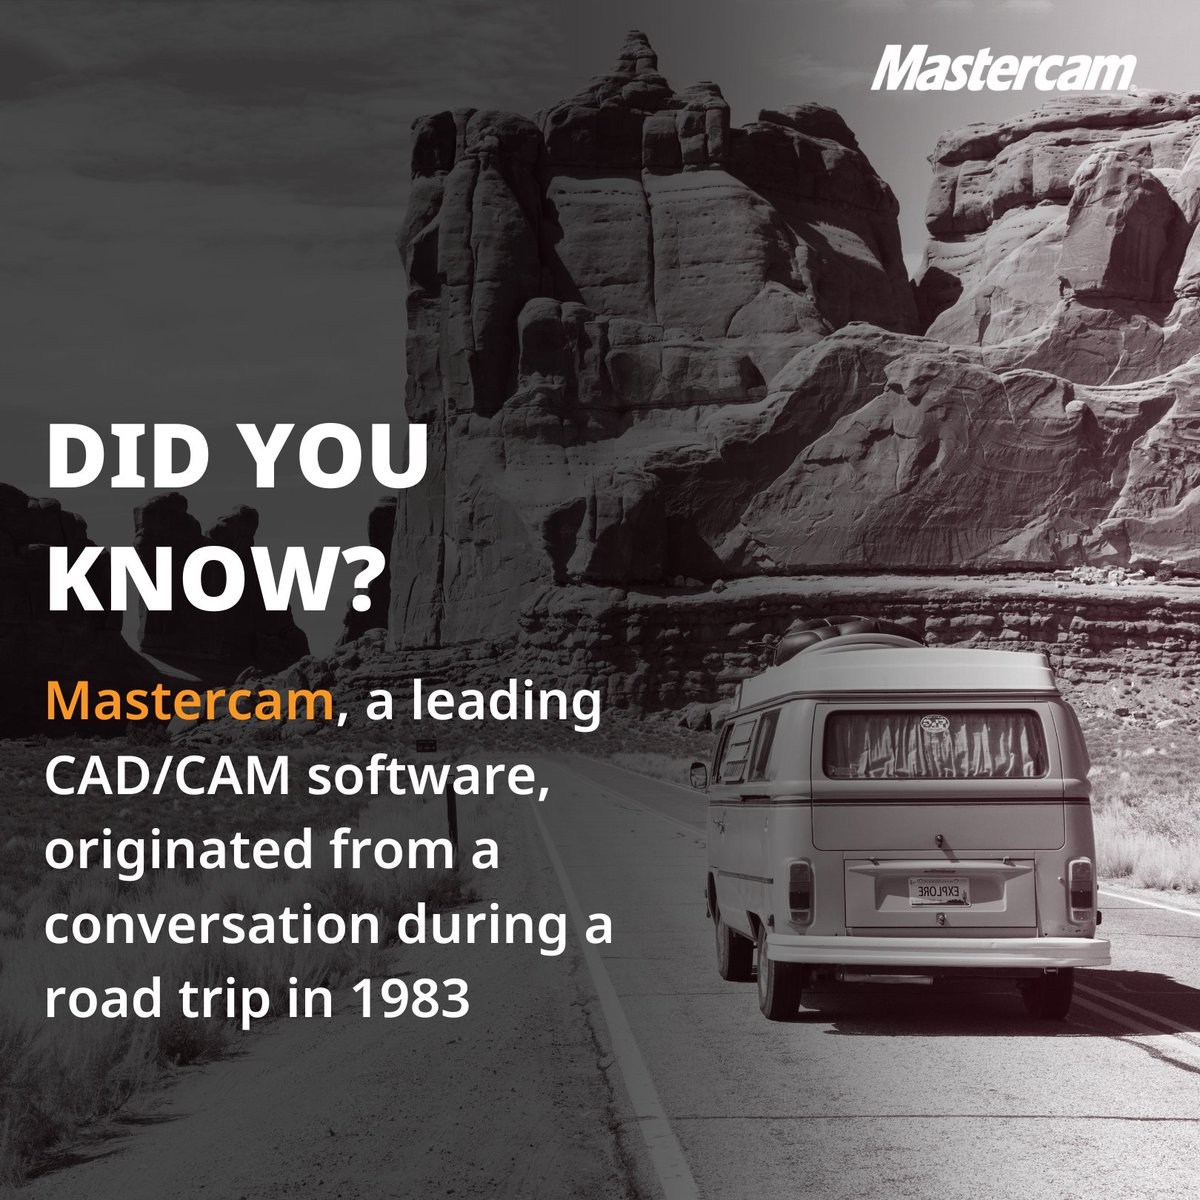 𝗗𝗶𝗱 𝘆𝗼𝘂 𝗸𝗻𝗼𝘄?
Mastercam, a leading CAD/CAM software, originated from a conversation during a road trip in 1983.

Discover fascinating facts and insights with us!

#DidYouKnow #Mastercam #CNCmachining #CAM